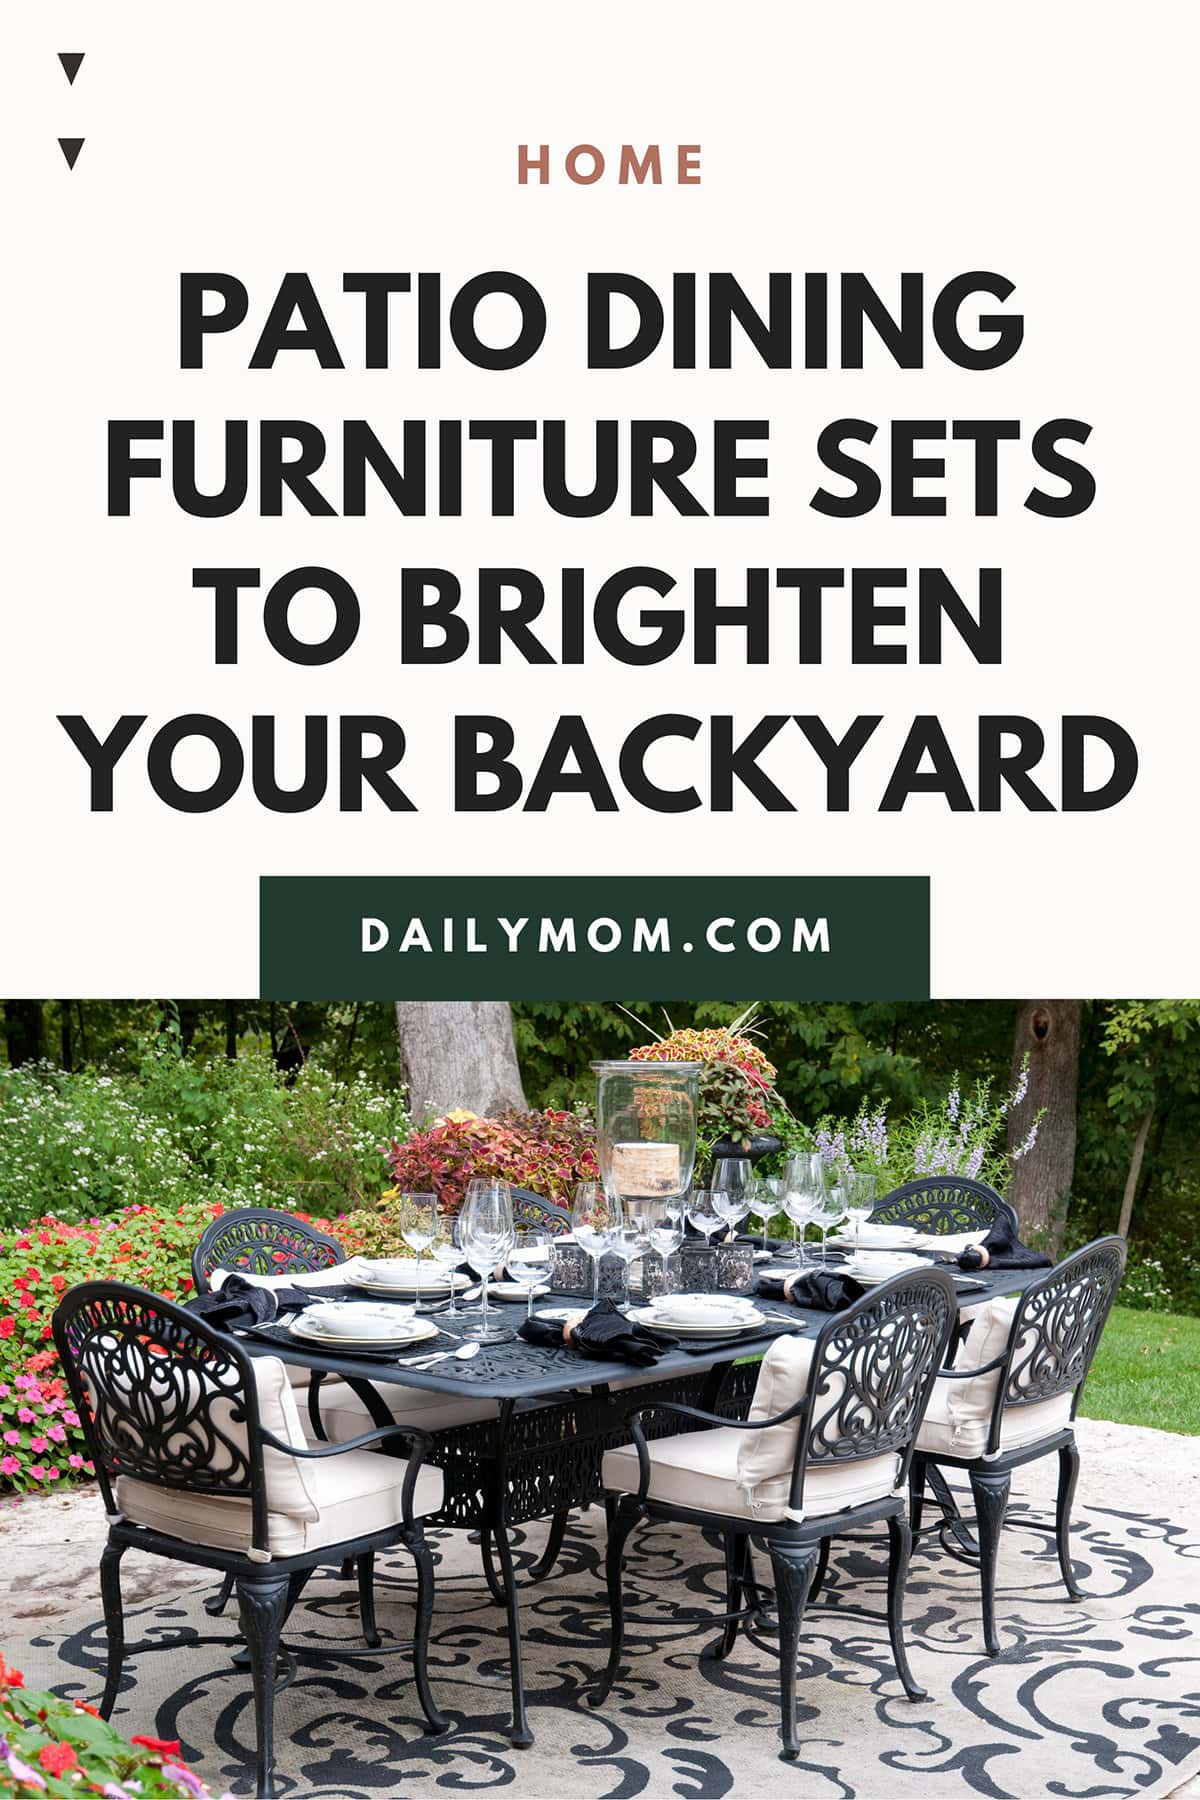 Daily-Mom-Parent-Portal-Patio-Dining-Furniture-Sets